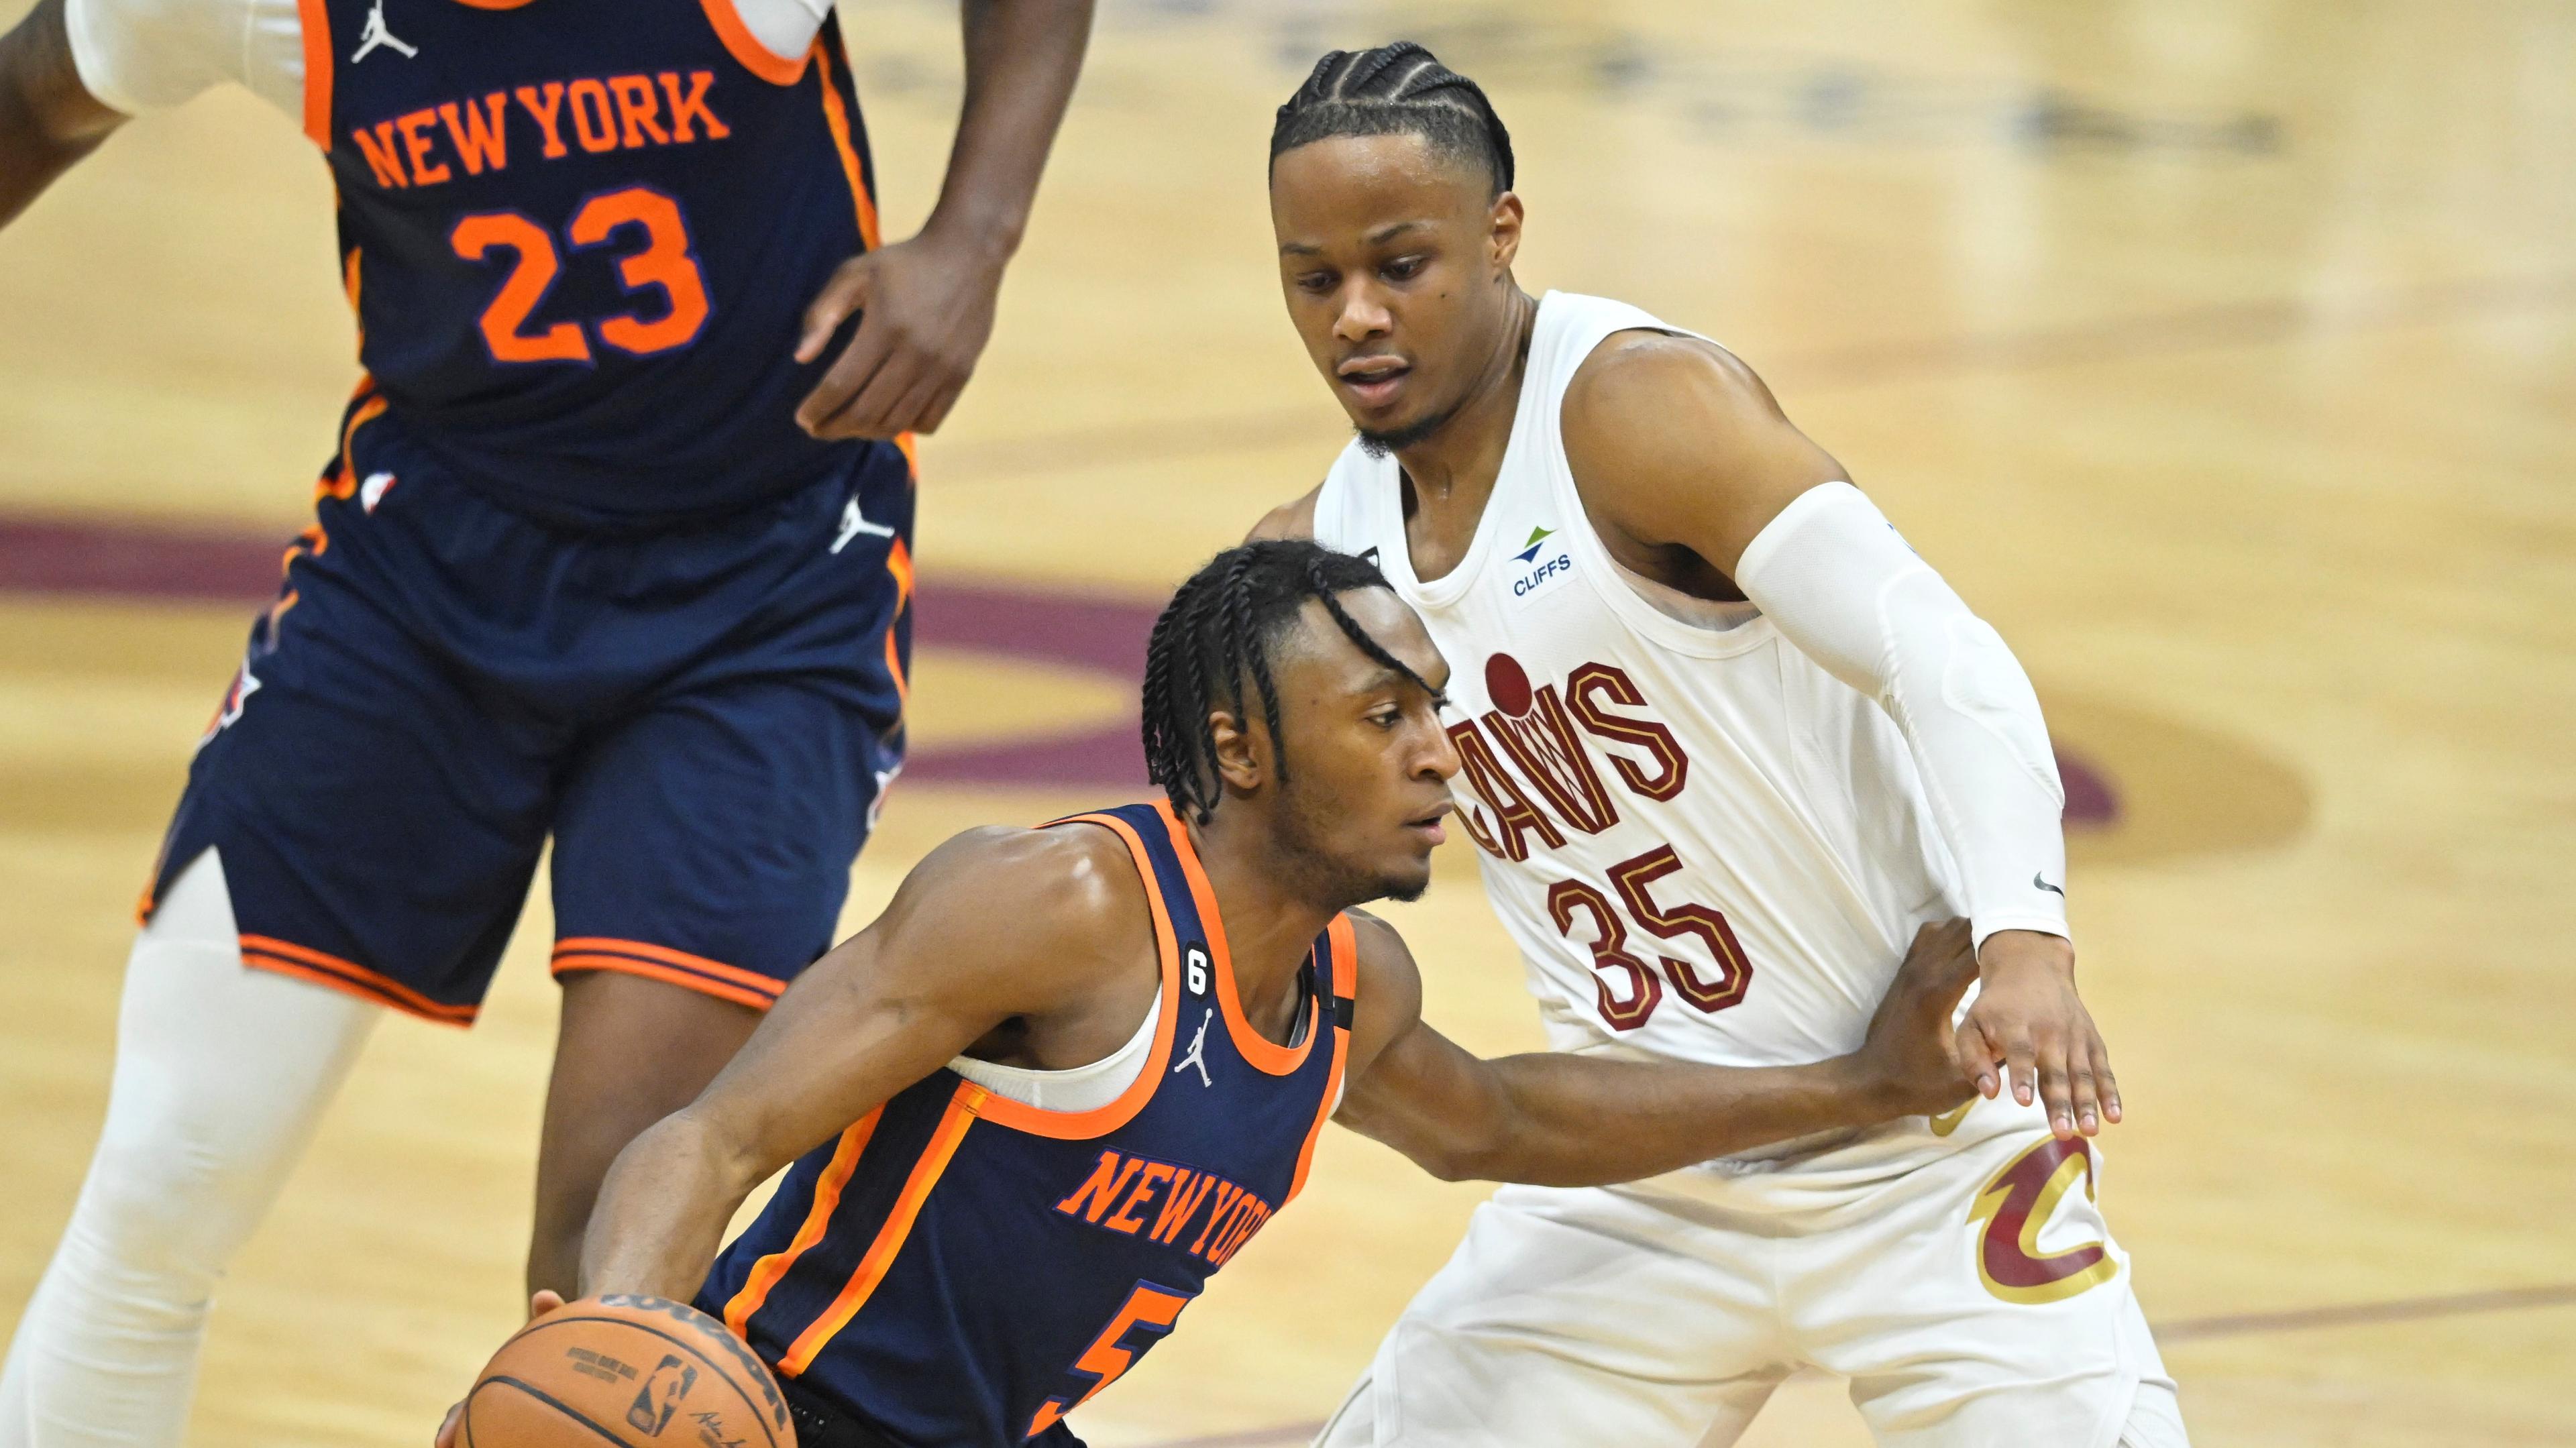 Apr 15, 2023; Cleveland, Ohio, USA; New York Knicks guard Immanuel Quickley (5) dribbles beside Cleveland Cavaliers forward Isaac Okoro (35) in the first quarter of game one of the 2023 NBA playoffs at Rocket Mortgage FieldHouse. Mandatory Credit: David Richard-USA TODAY Sports / © David Richard-USA TODAY Sports